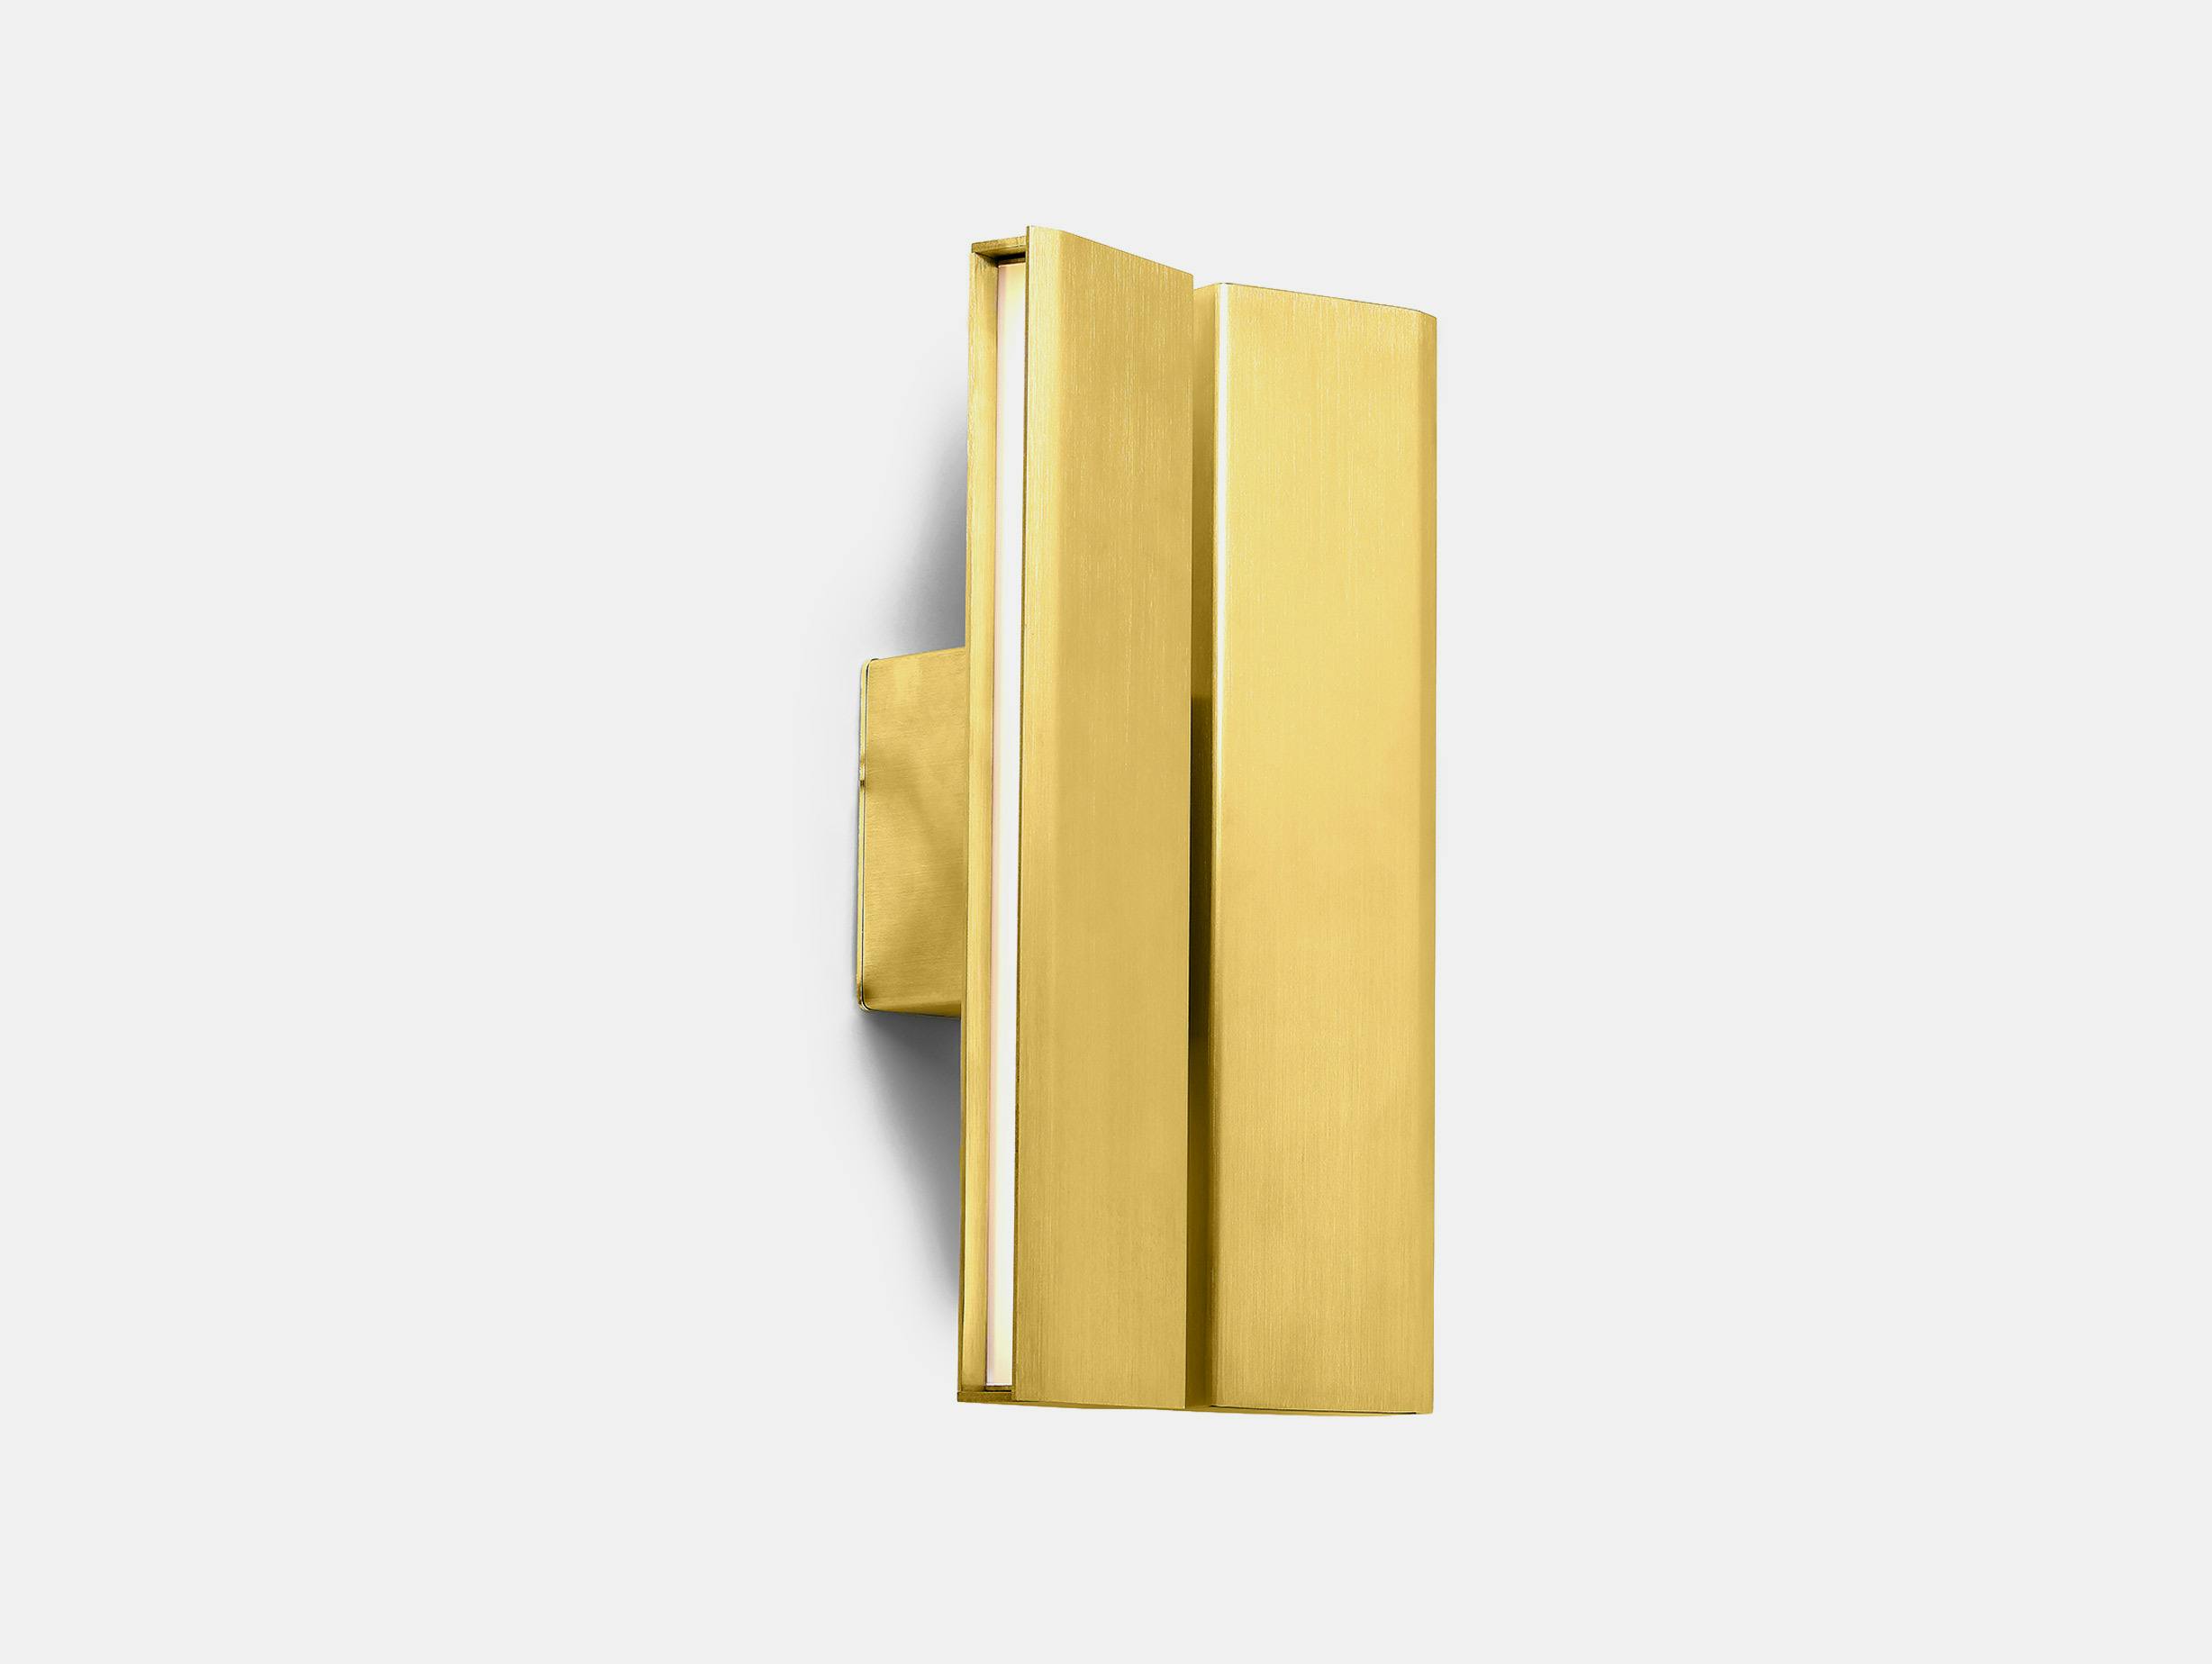 Anour oeo studio papilio wall light brushed brass